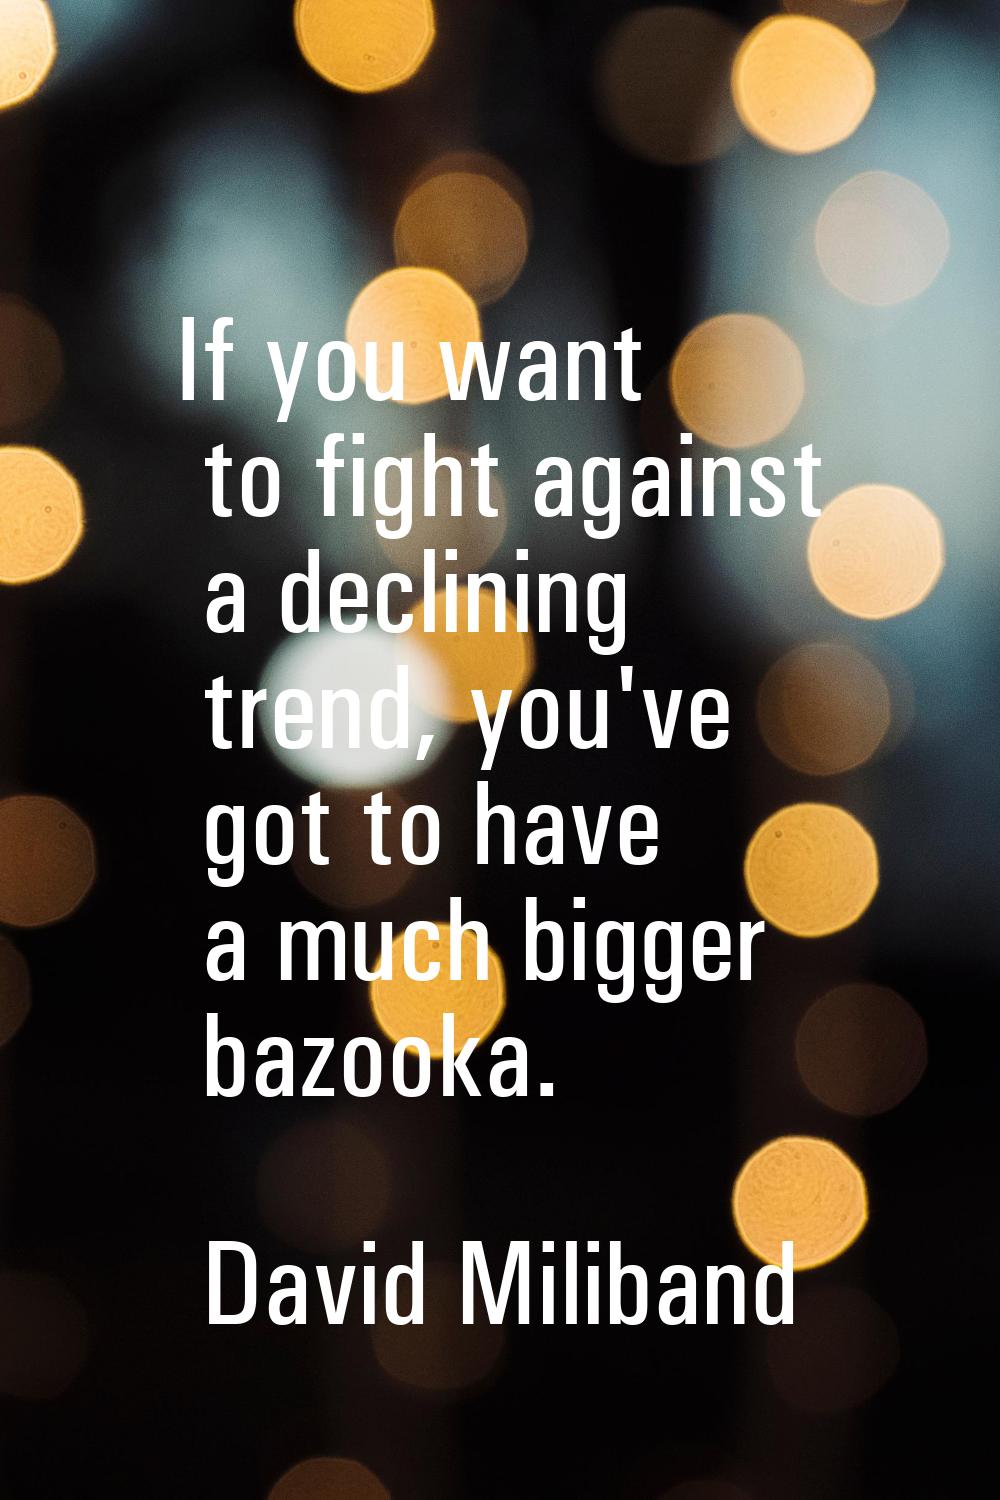 If you want to fight against a declining trend, you've got to have a much bigger bazooka.